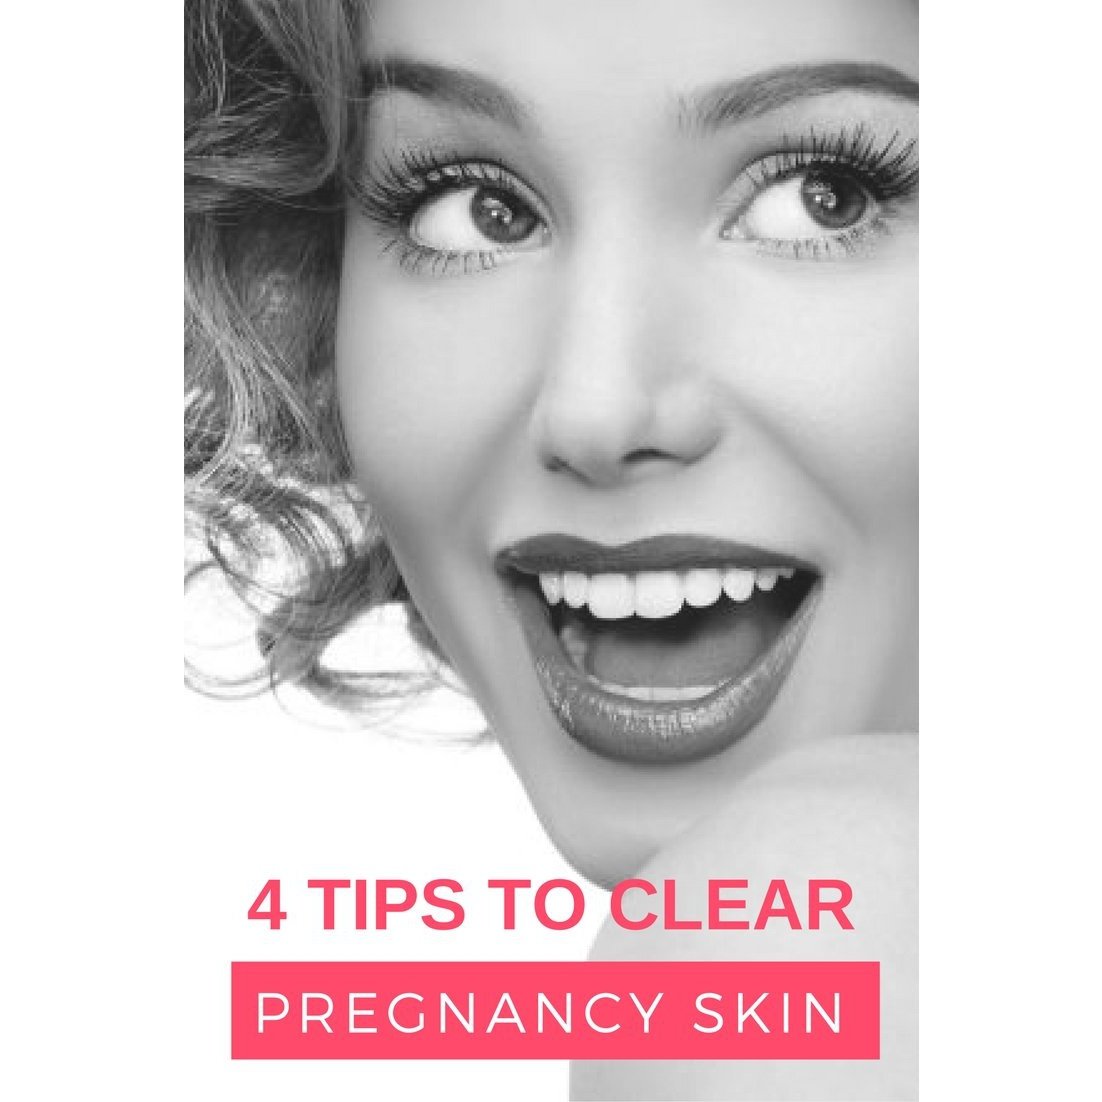 How to Get Rid of Pregnancy Acne: 4 Essential Tips